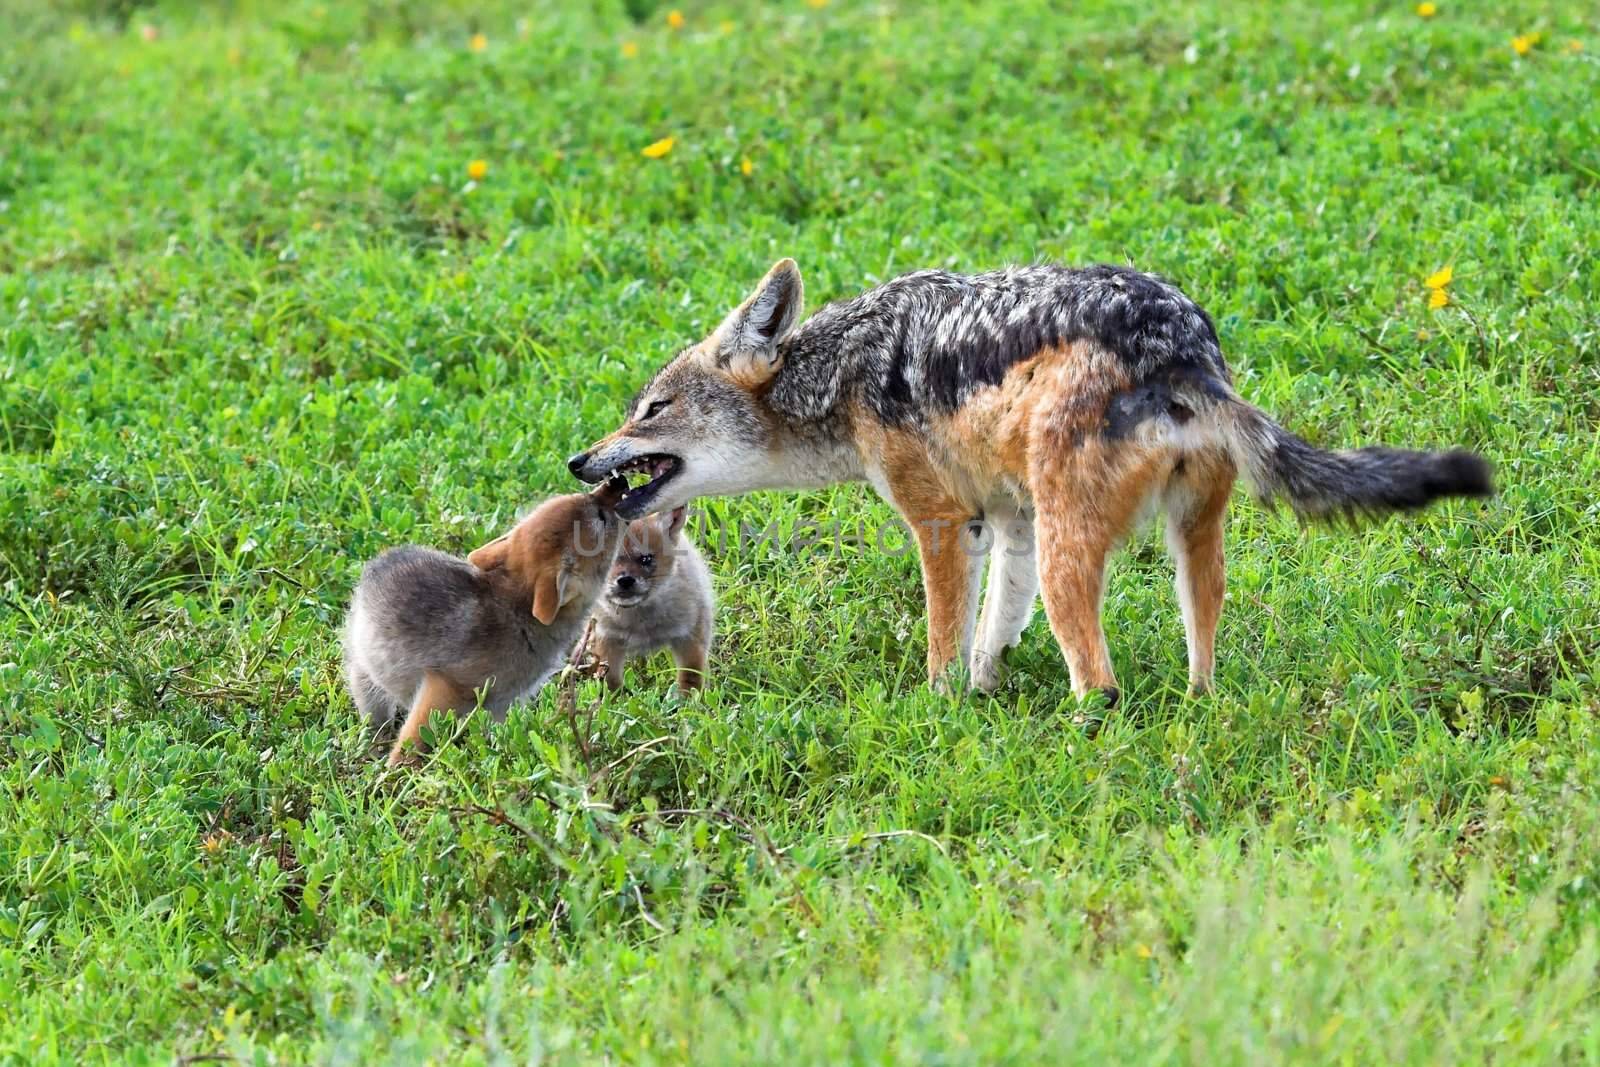 Jackal pup begging for food from its mother